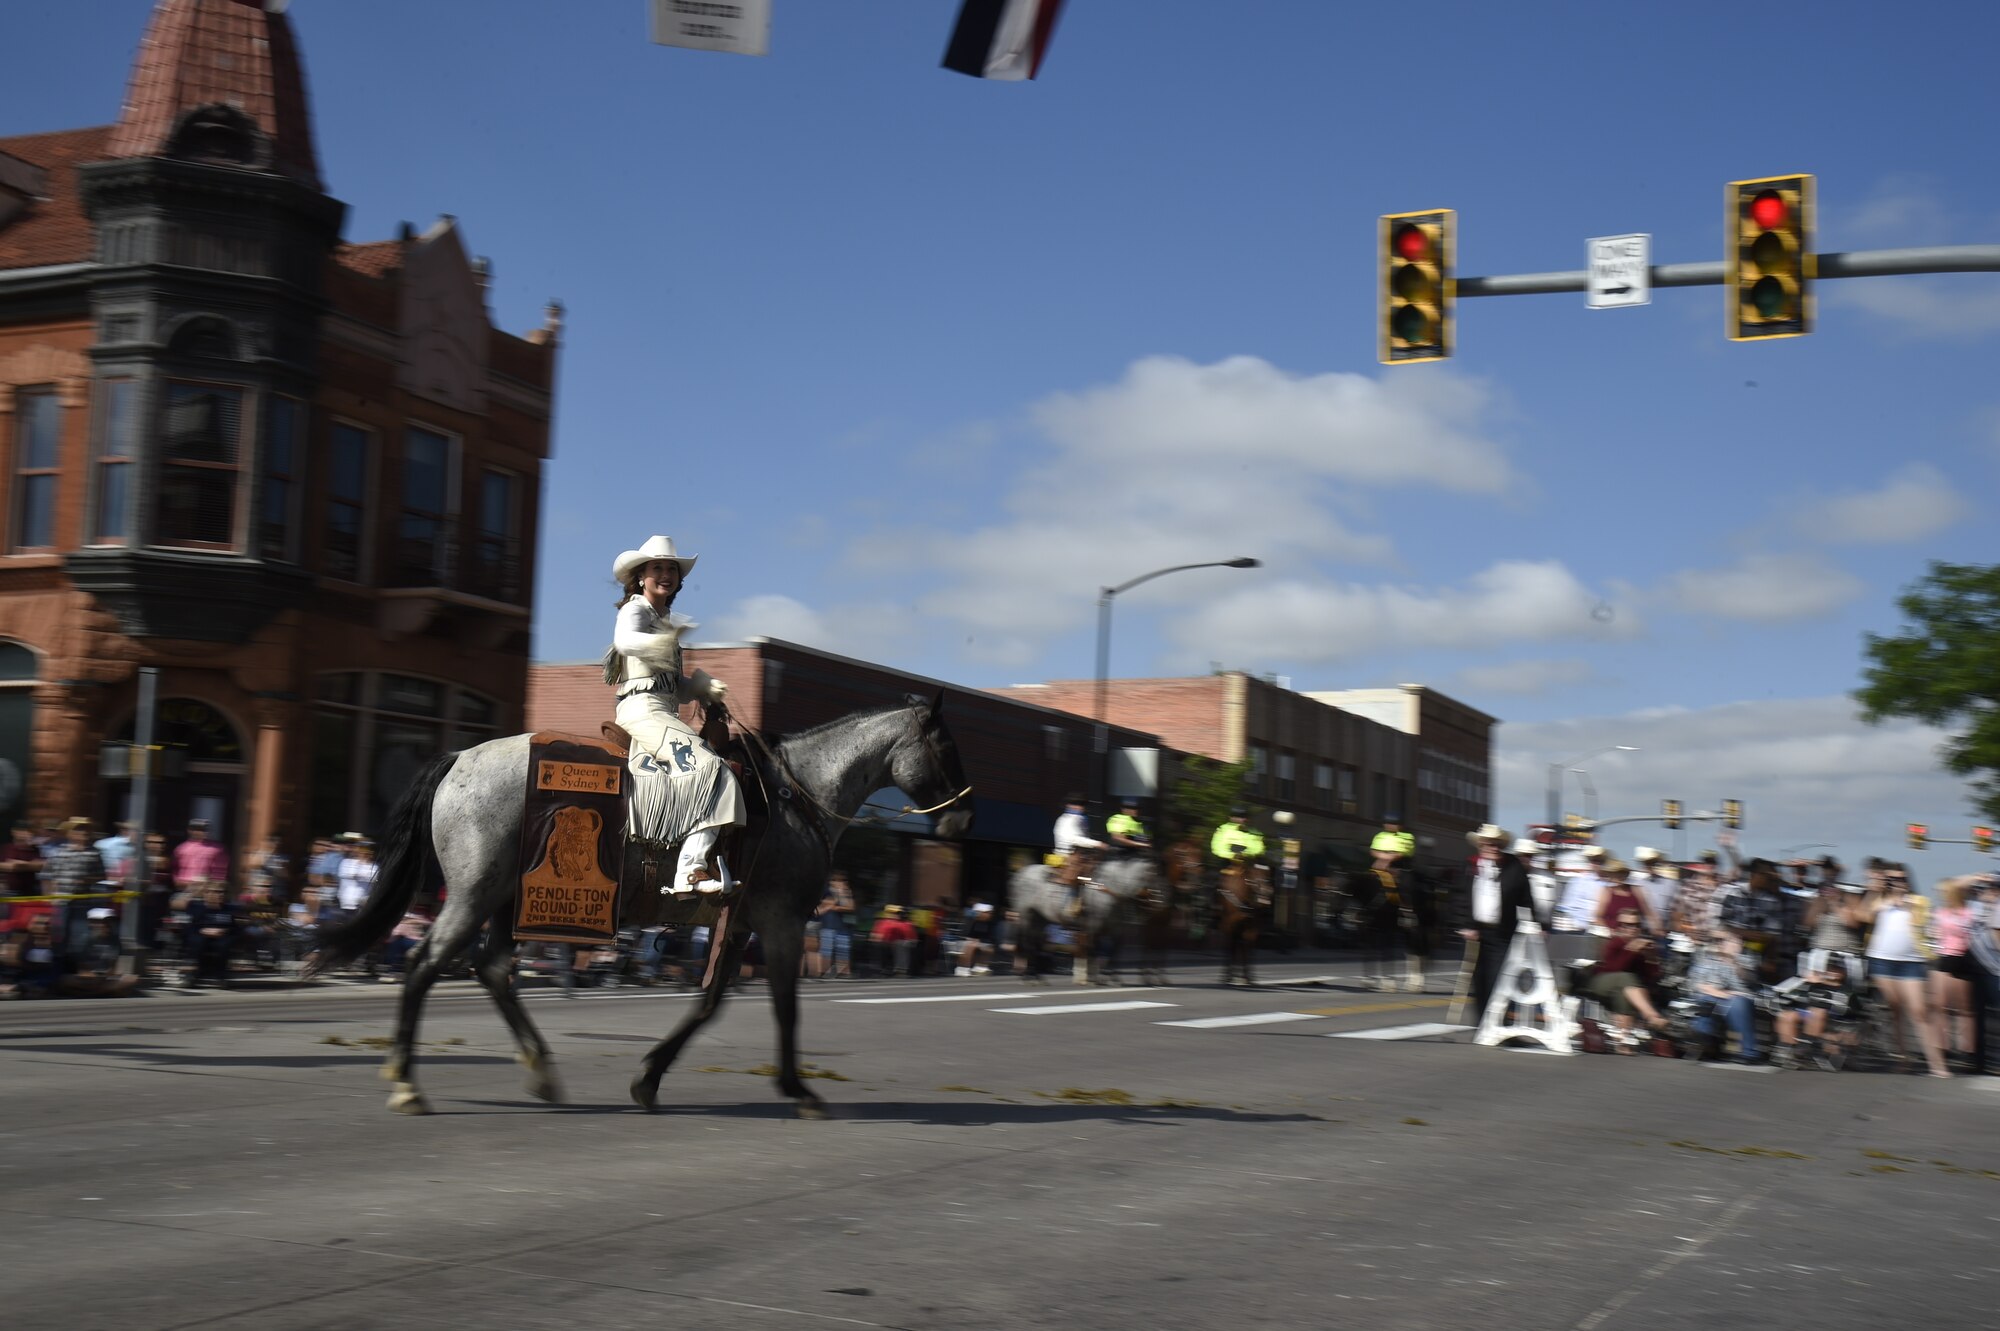 Rodeo Queen Sydney Jones of Pendleton, Ore., turns her horse from Lincolnway to Carey Ave. during the Cheyenne Frontier Days Grand Parade July 20, 2019, in Cheyenne, Wyo. Rodeo Queens from all over the United States joined in the parade. The F.E. Warren Air Force Base and Cheyenne communities came together to celebrate the CFD rodeo and festival, which runs from July 19-28. (U.S. Air Force photo by Tech Sgt. Tyler Placie)